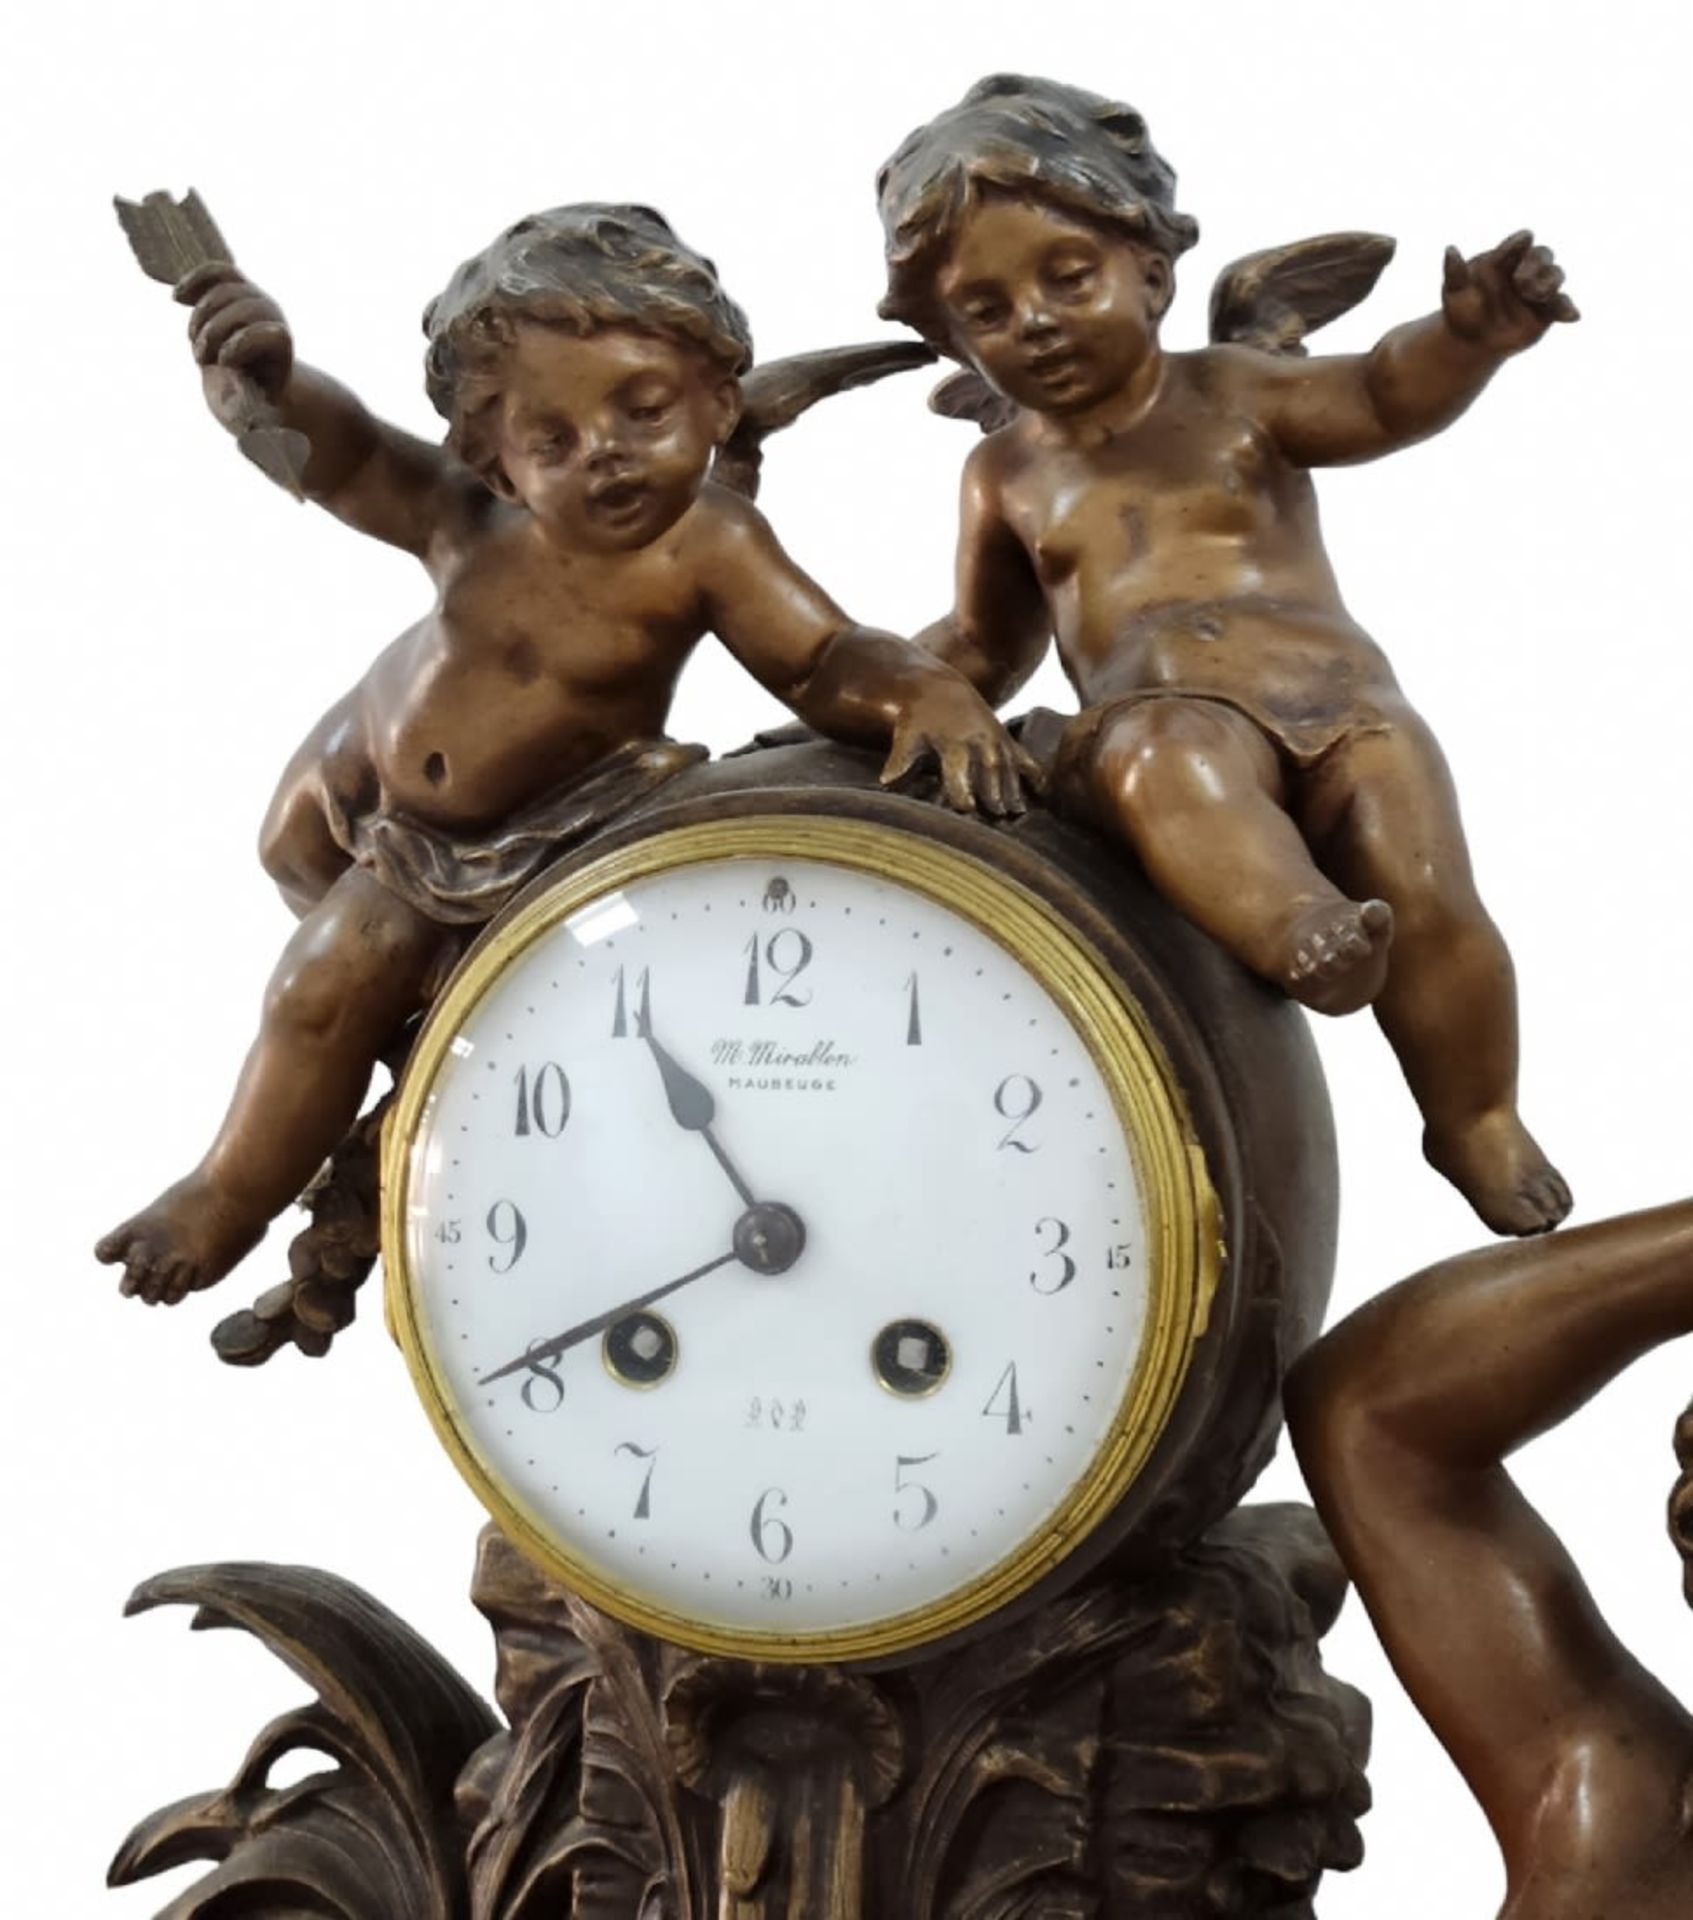 'Angels surprising a Nymph' - Antique French Mantel Clock, large and magnificent, made of spelter - Bild 4 aus 11